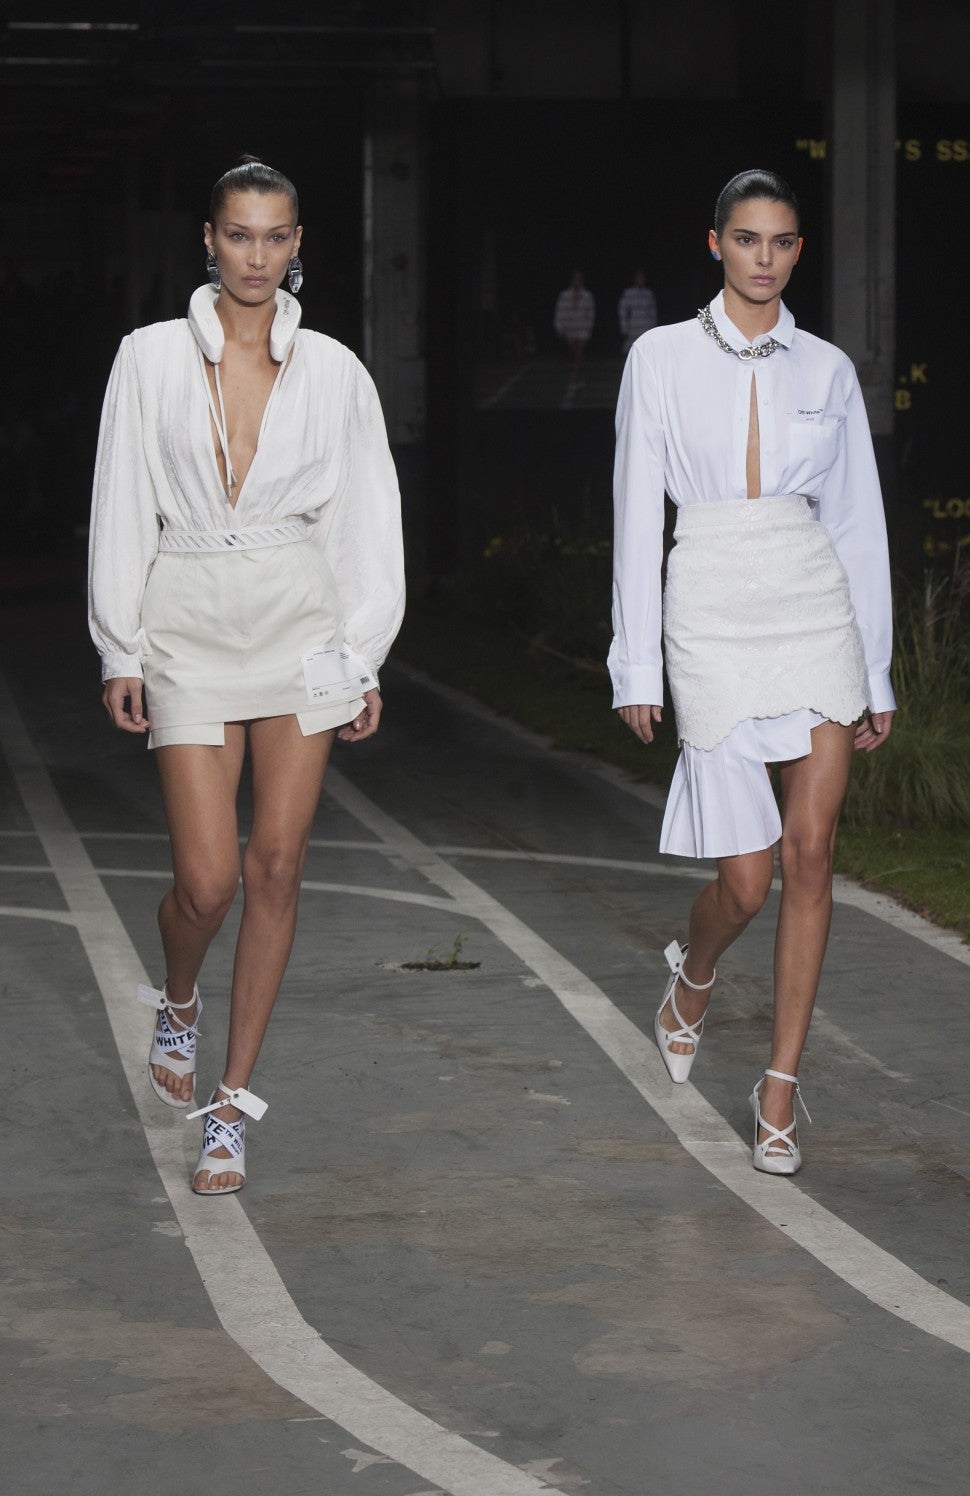 Kendall Jenner and Bella Hadid at Off-White